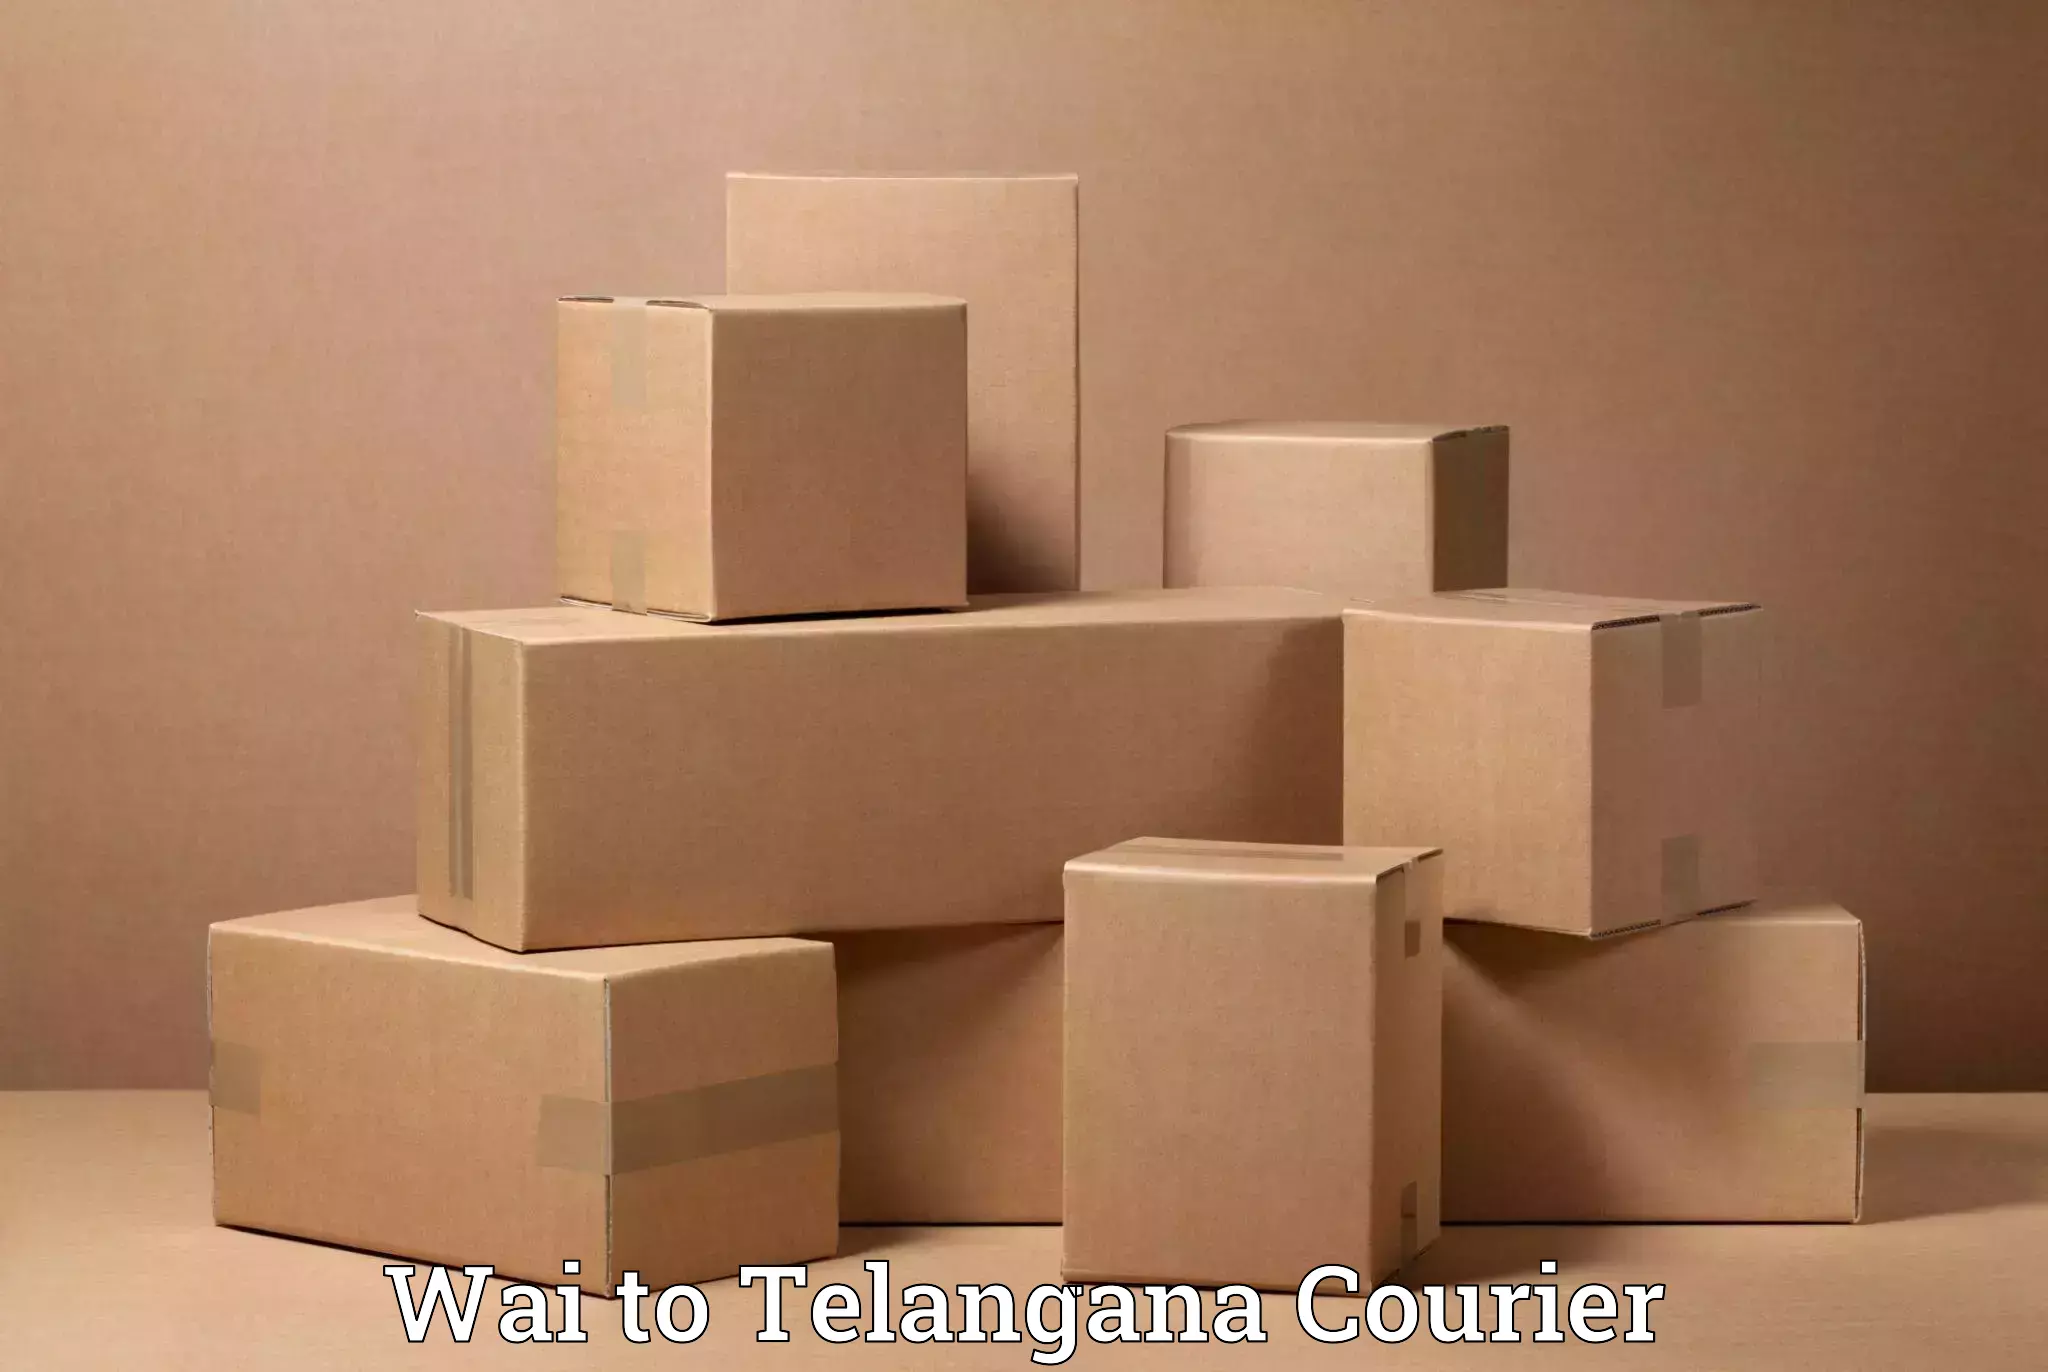 Dependable moving services Wai to Telangana